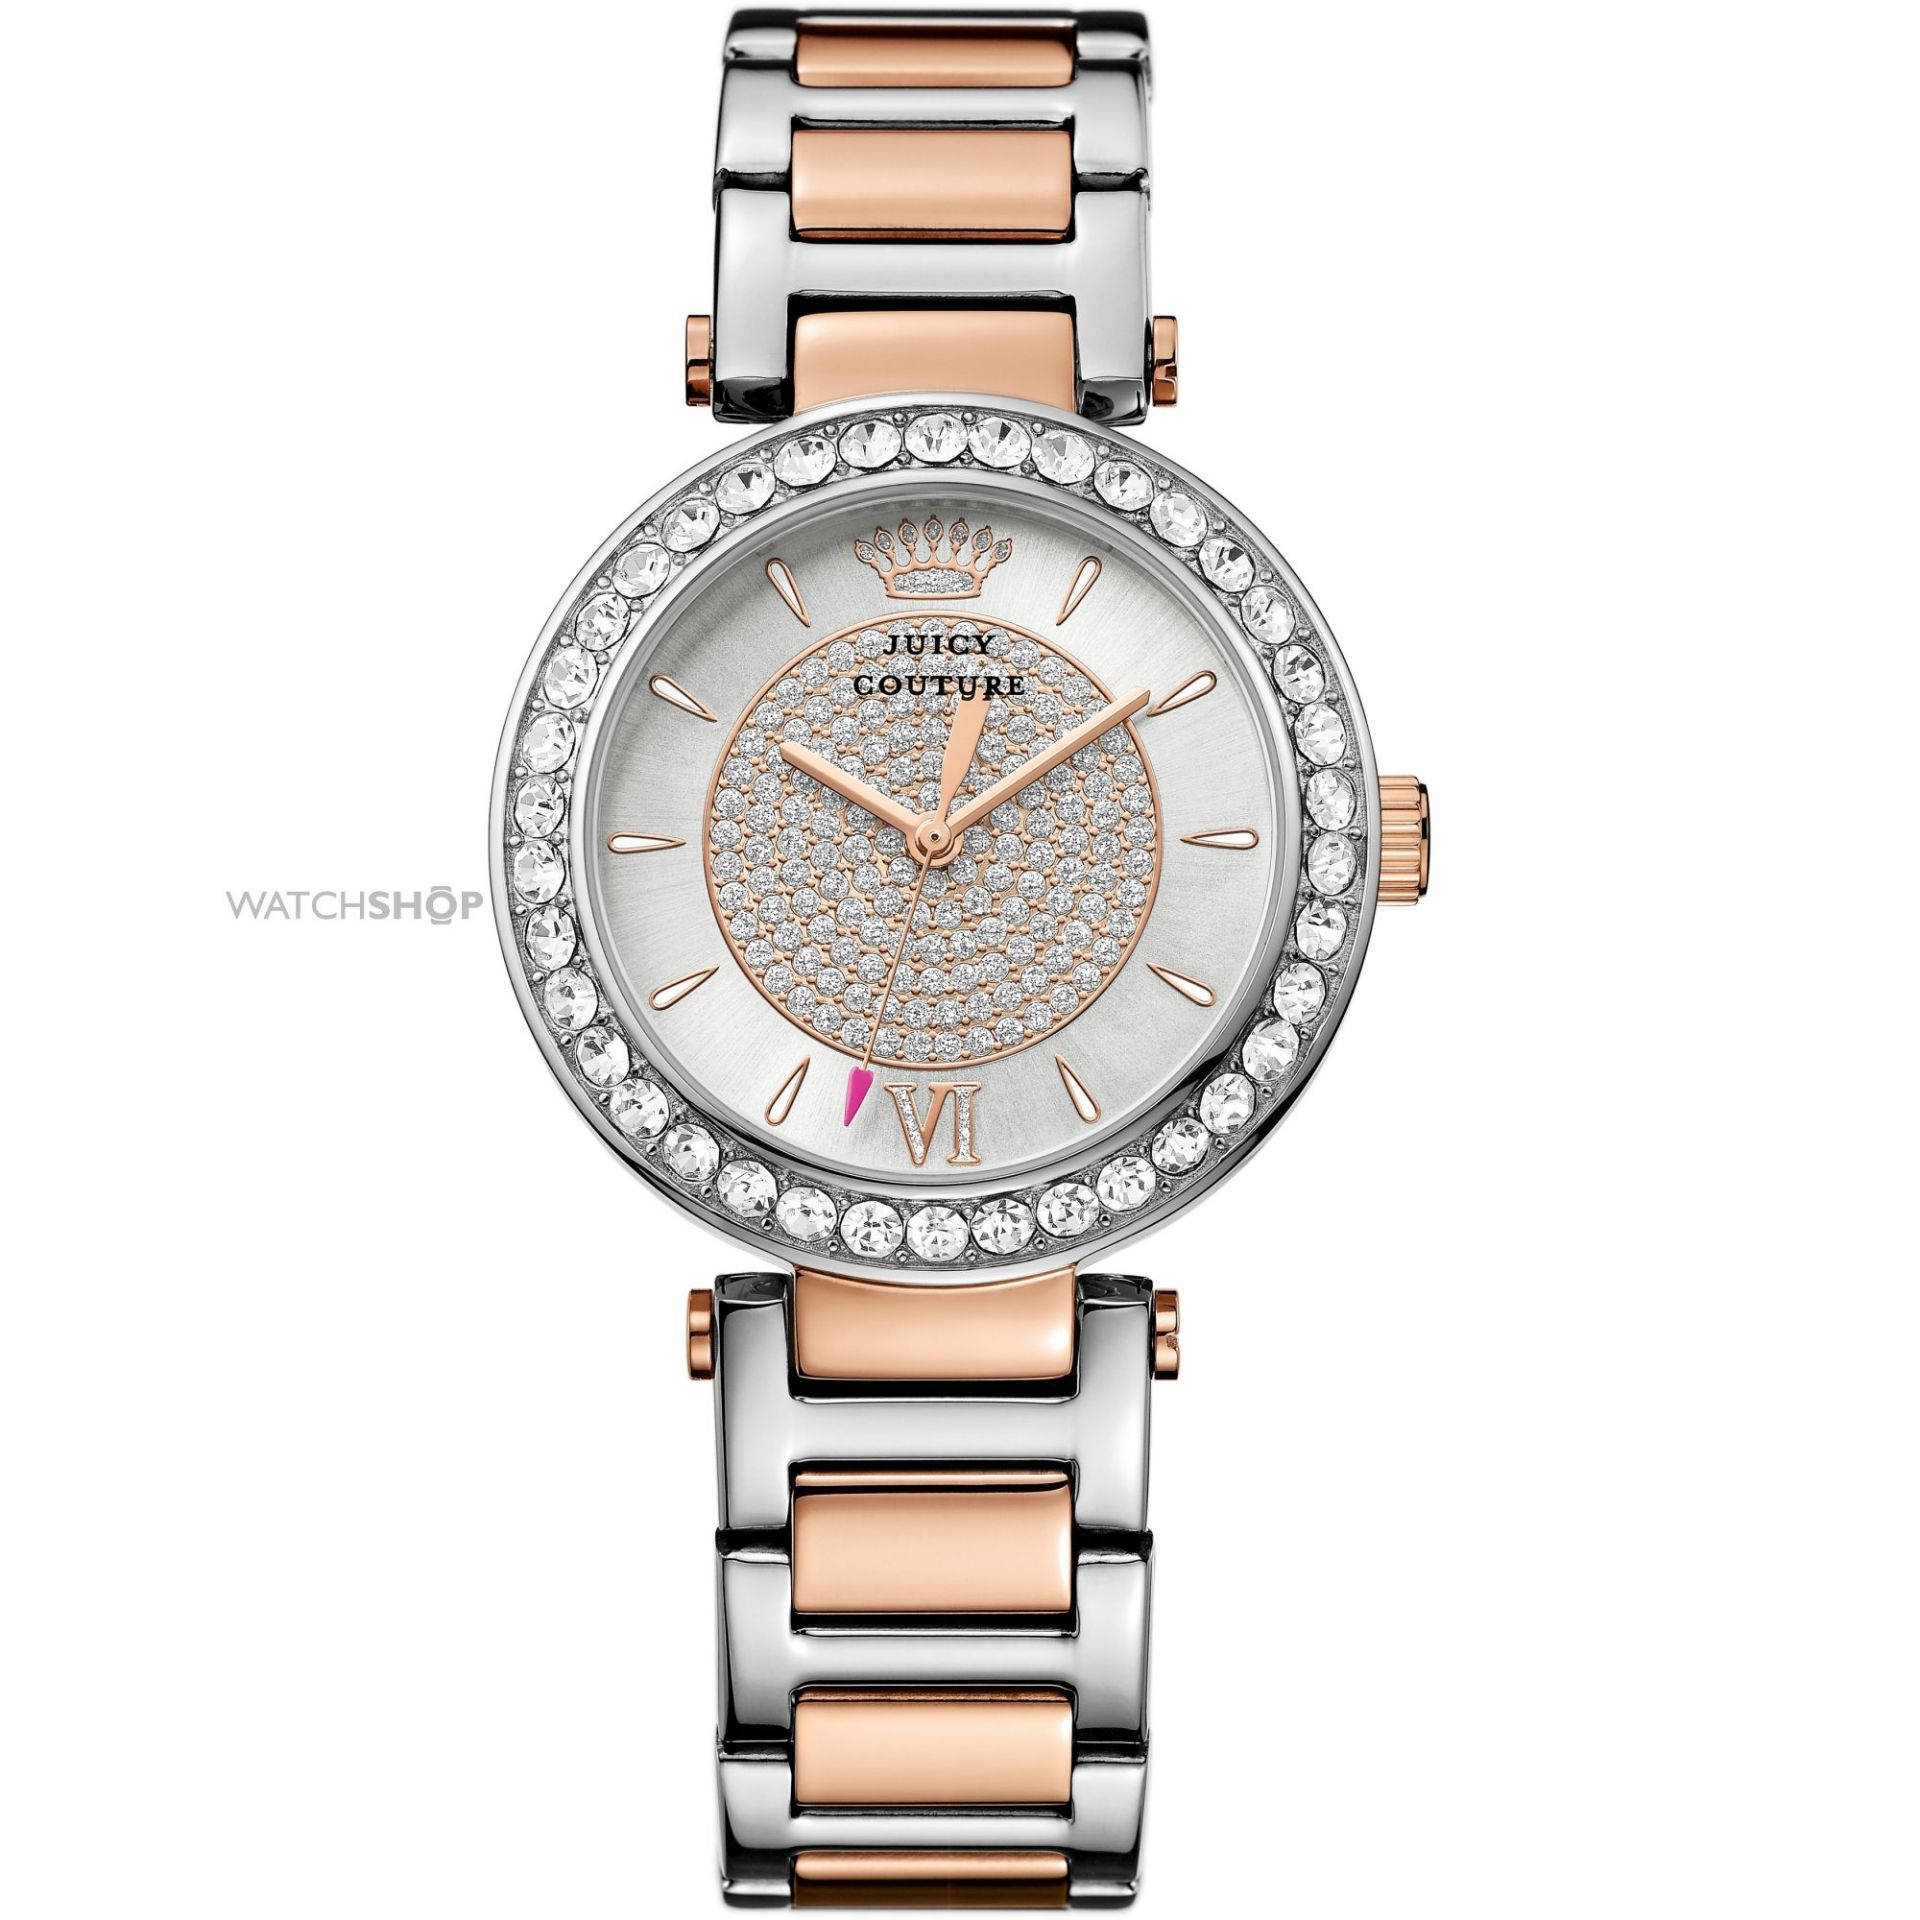 BRAND NEW JUICY COUTURE LADIES WRIST WATCH WITH 2 YEARS INTERNATIONAL WARRANTY (1901230)